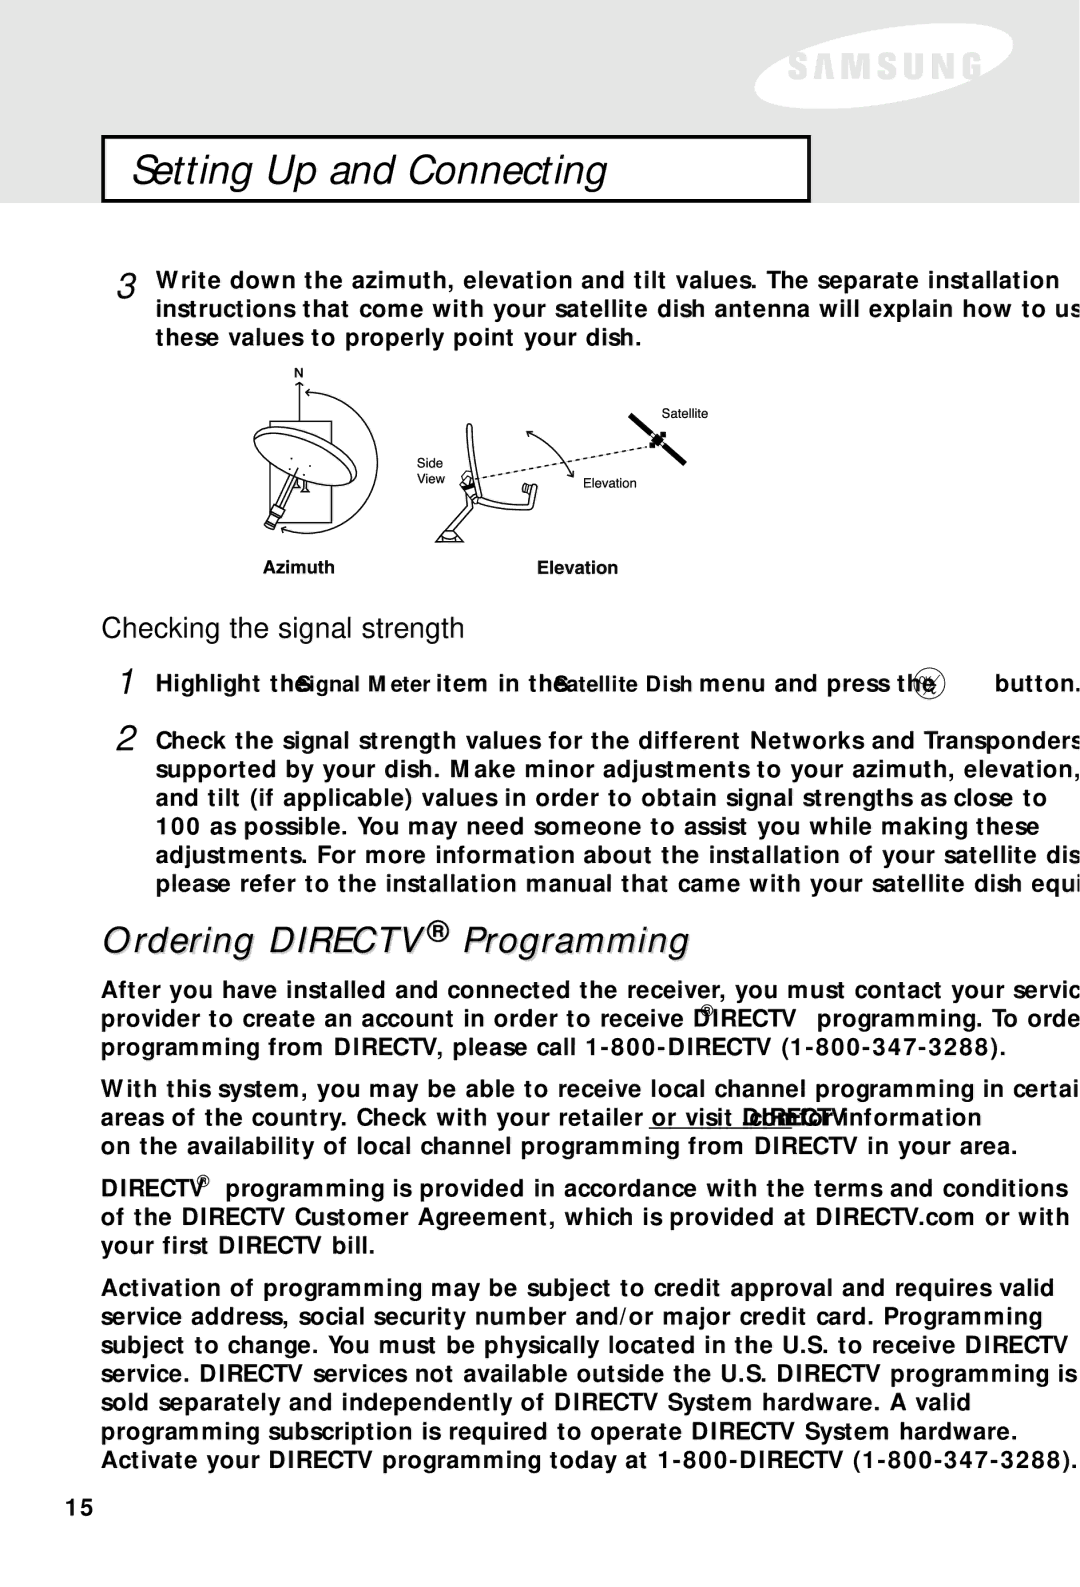 Samsung SIR-S60W owner manual Ordering Directv Programming, Checking the signal strength 